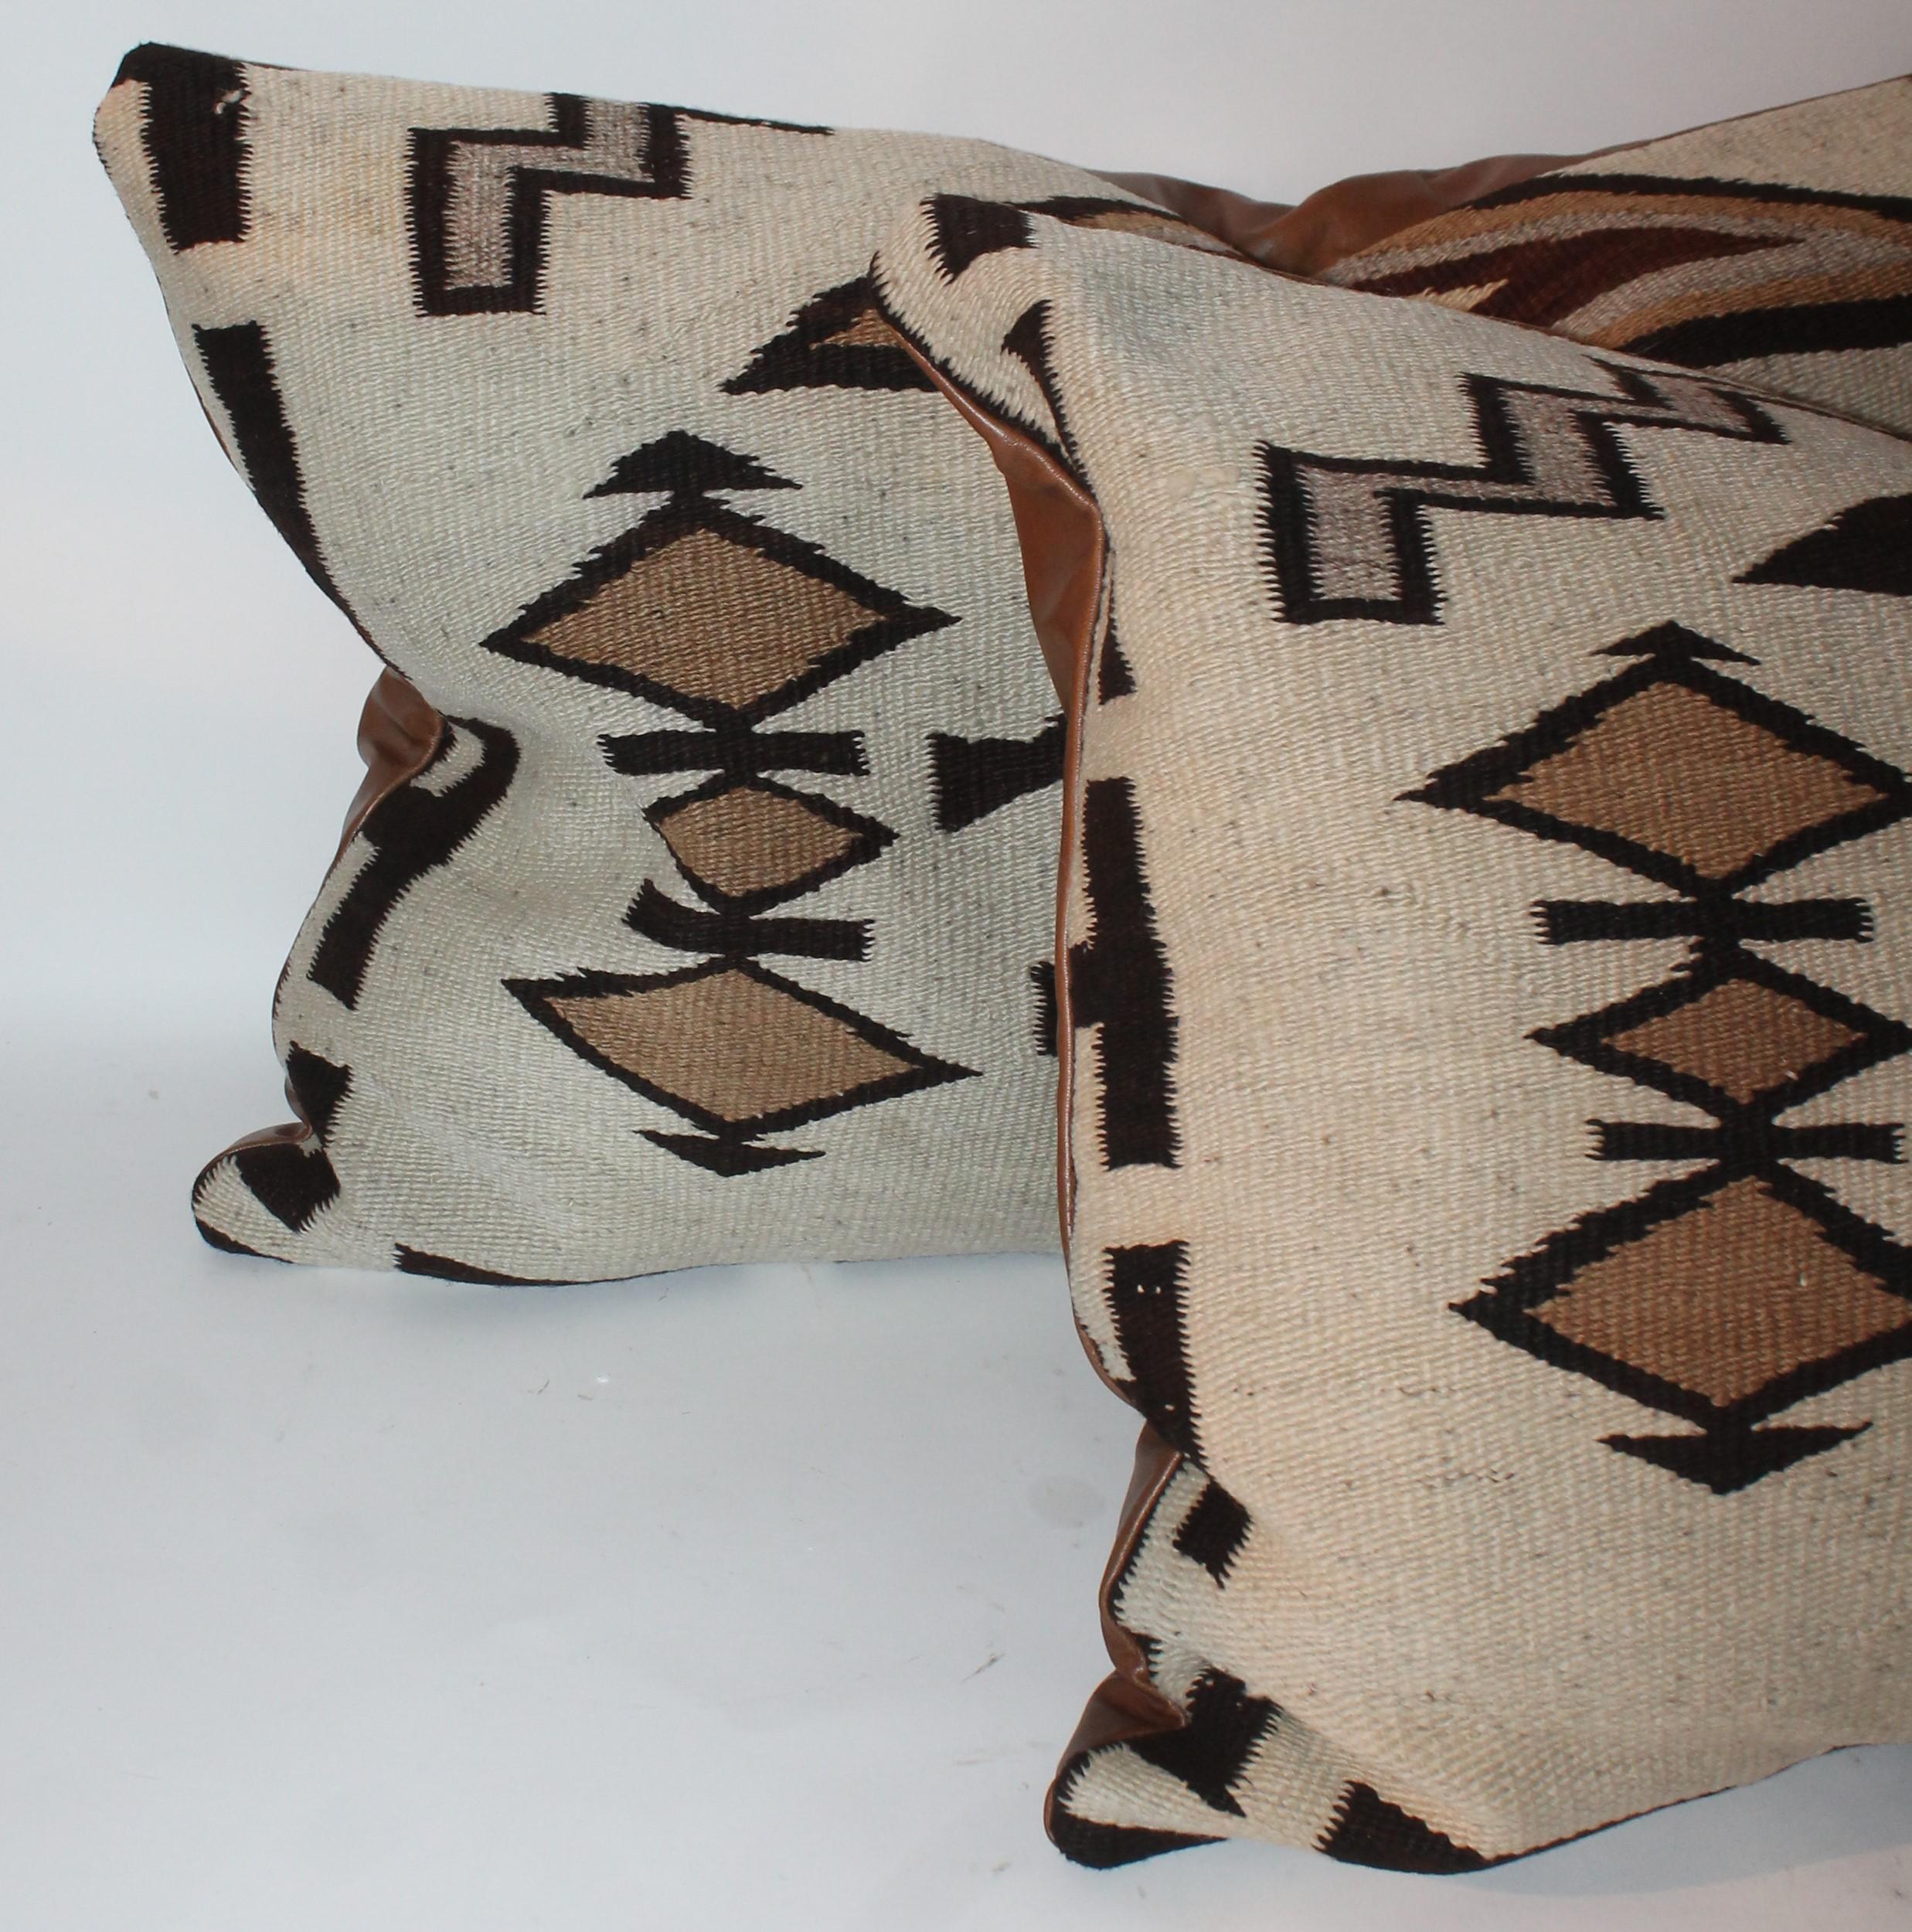 These large Navajo Indian weaving big bolster pillows have leather backings and down and feather fill. The condition is very good.